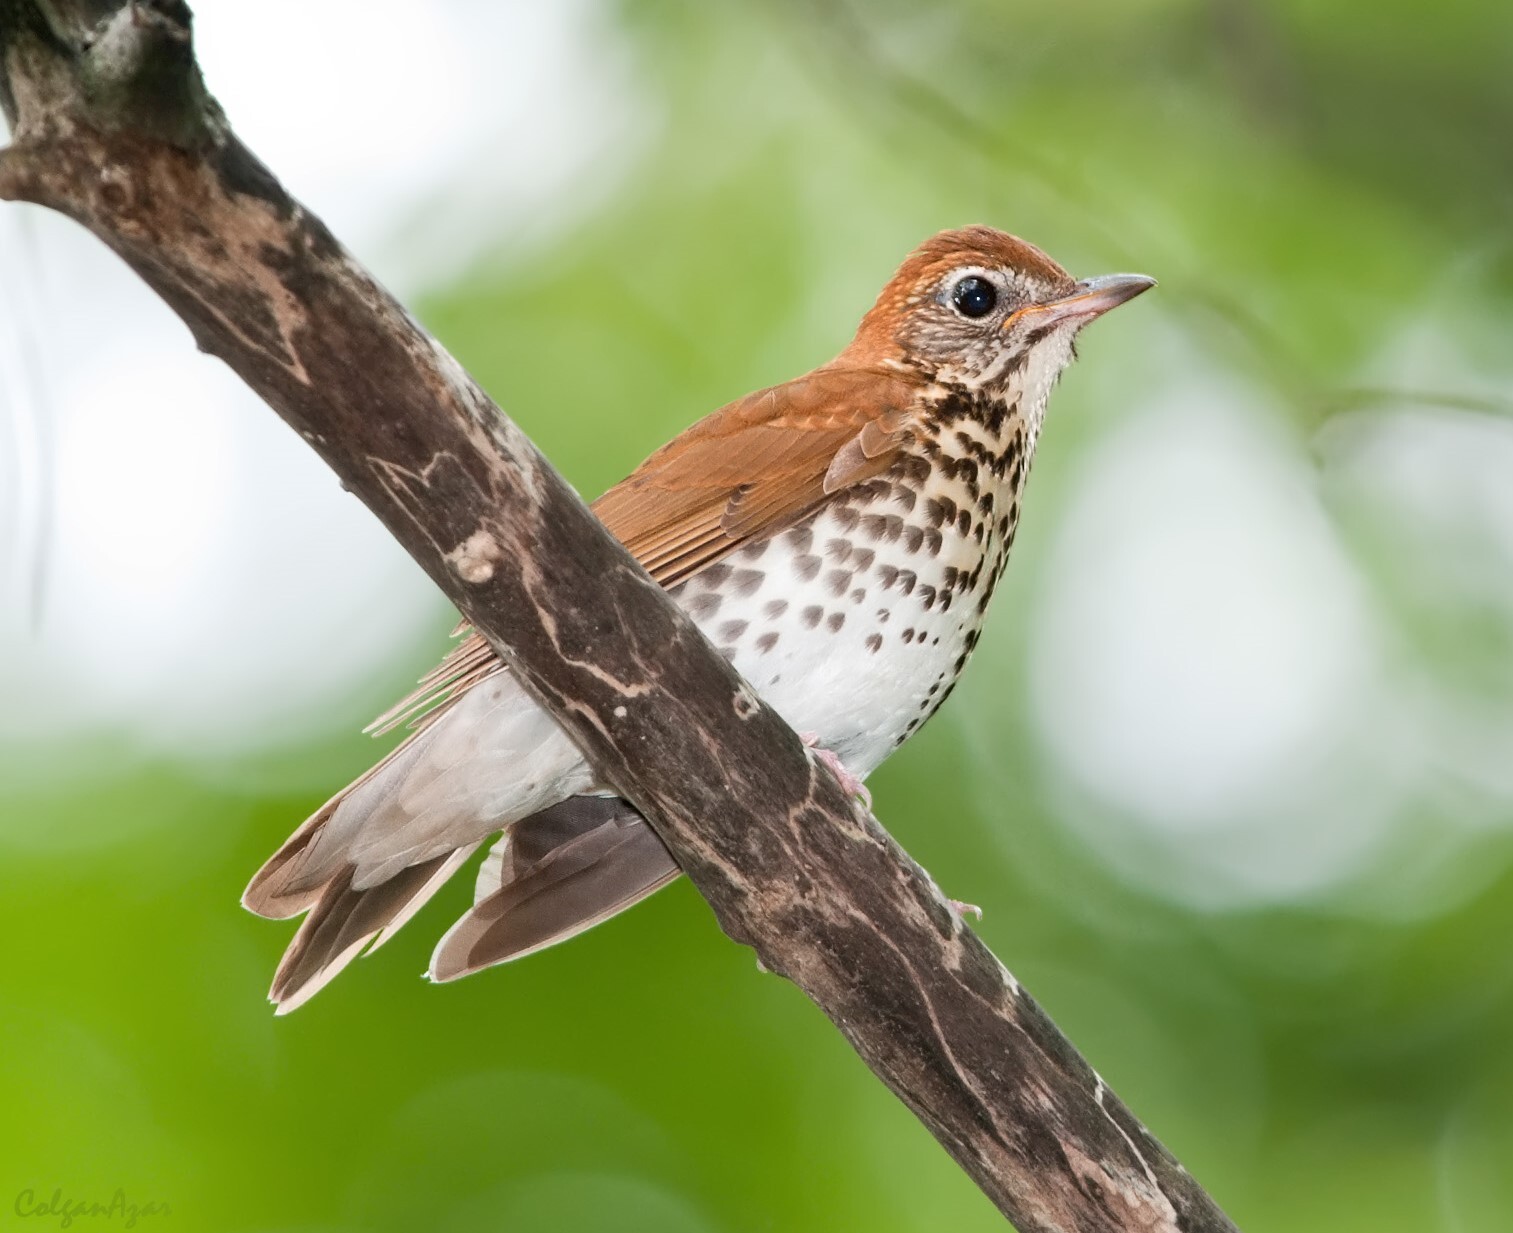 Wood Thrushes (here a juvenile bird) often nest in Inwood Hill Park. <a href="https://www.flickr.com/photos/puttefin/7168231036/" target="_blank">Photo</a>: Kelly Colgan Azar/<a href="https://creativecommons.org/licenses/by-nd/2.0/" target="_blank">CC BY-ND 2.0</a>